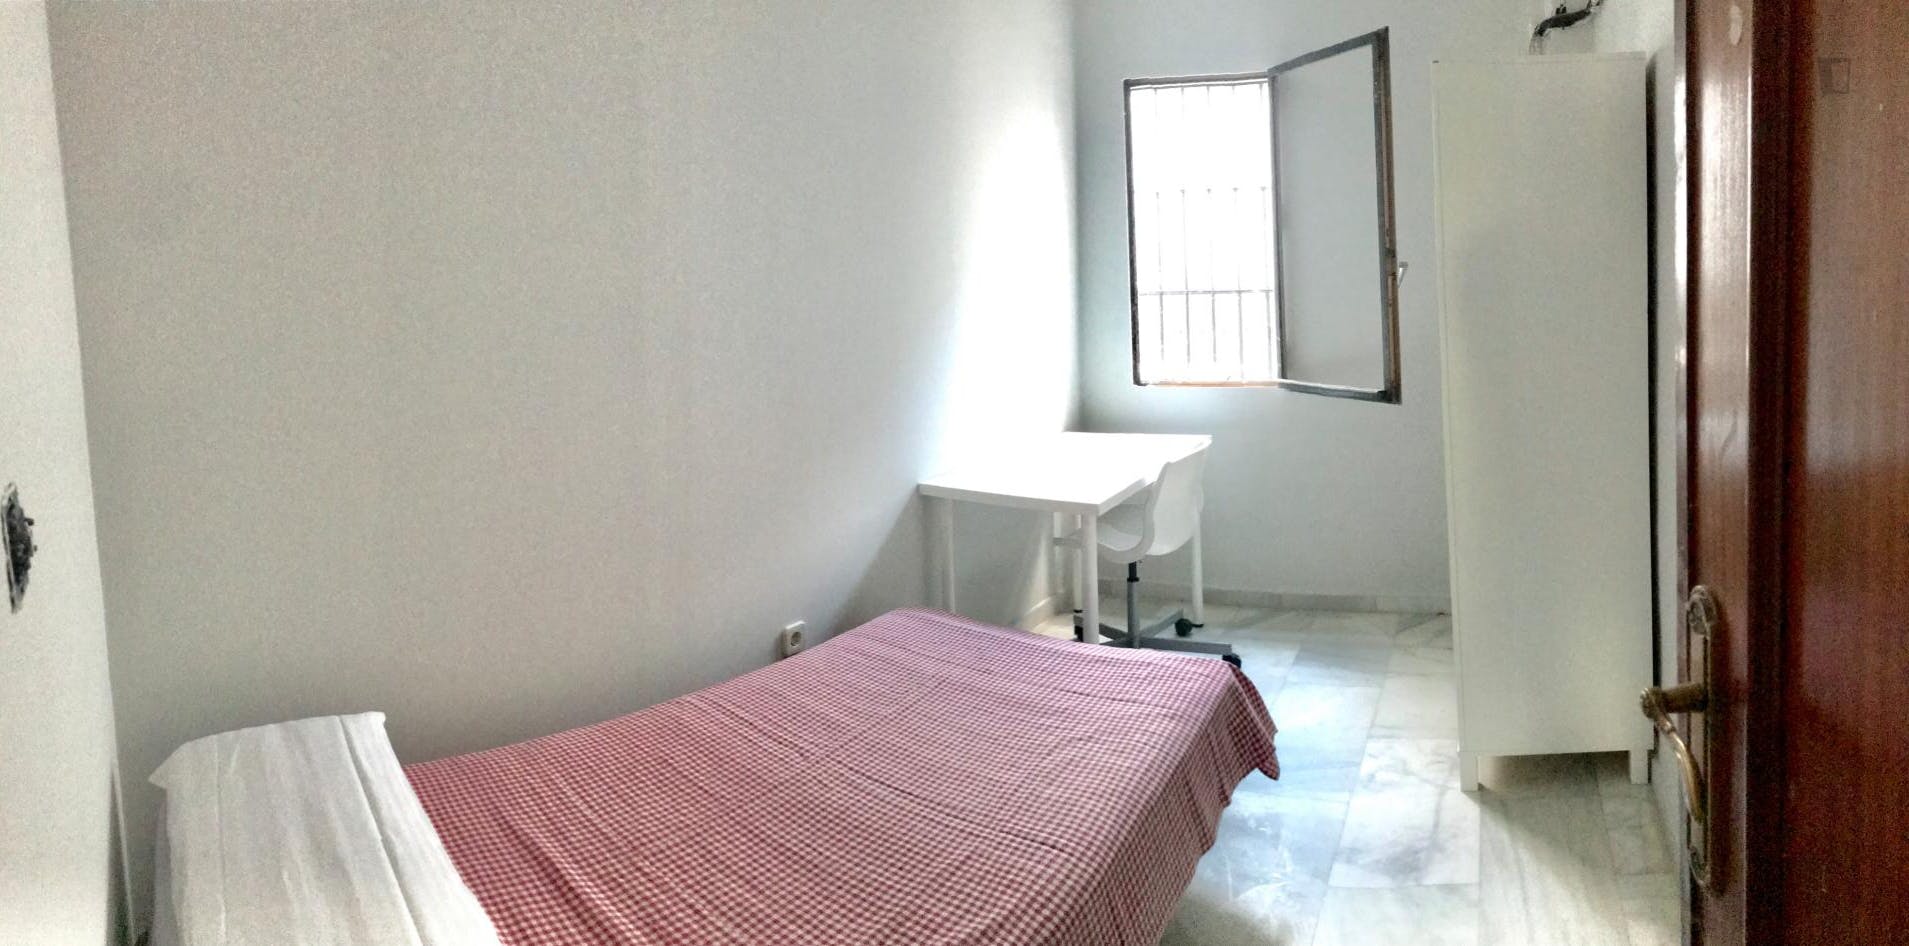 Humble single bedroom in a student flat in the centre of the city